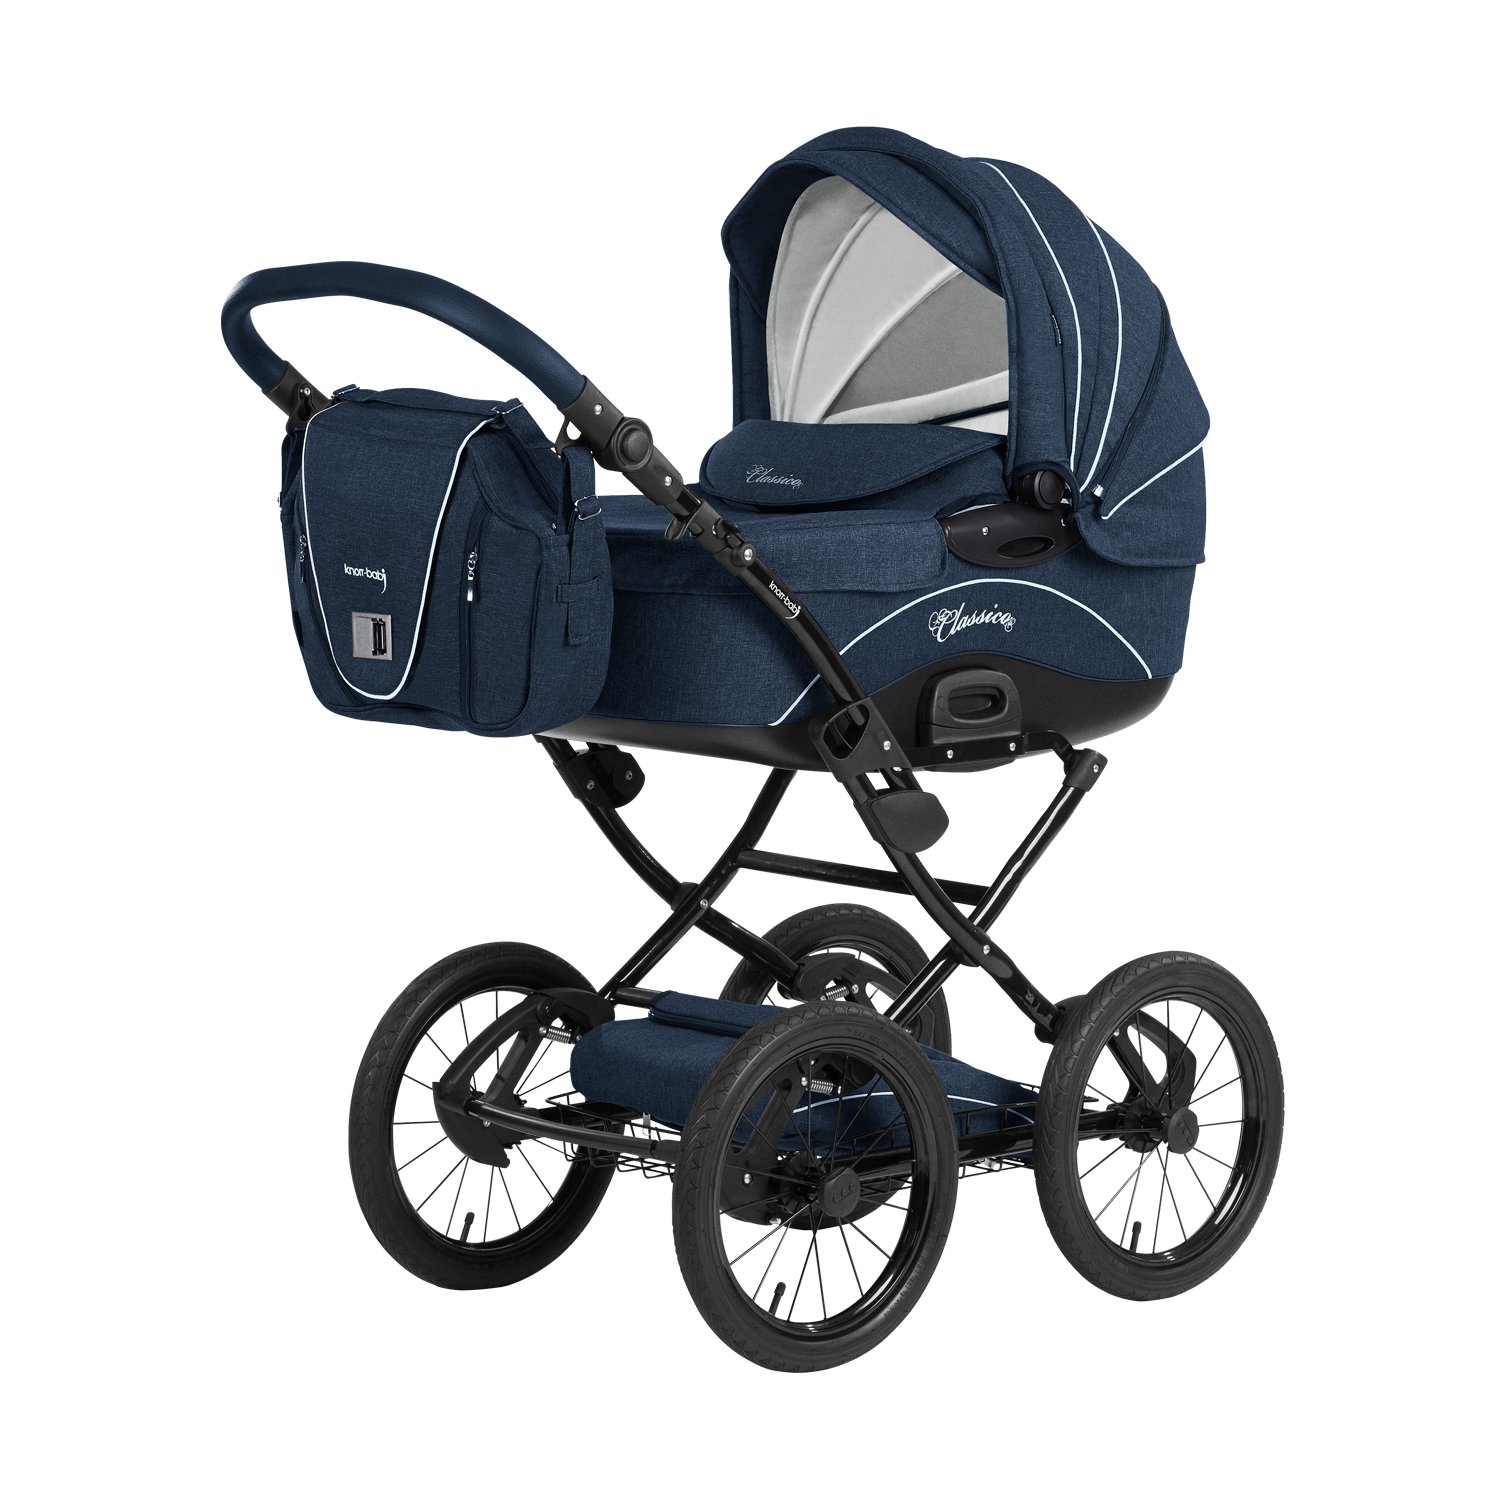 Knorr-Baby Classico 36000-1 Combi Pushchair Marine Blue